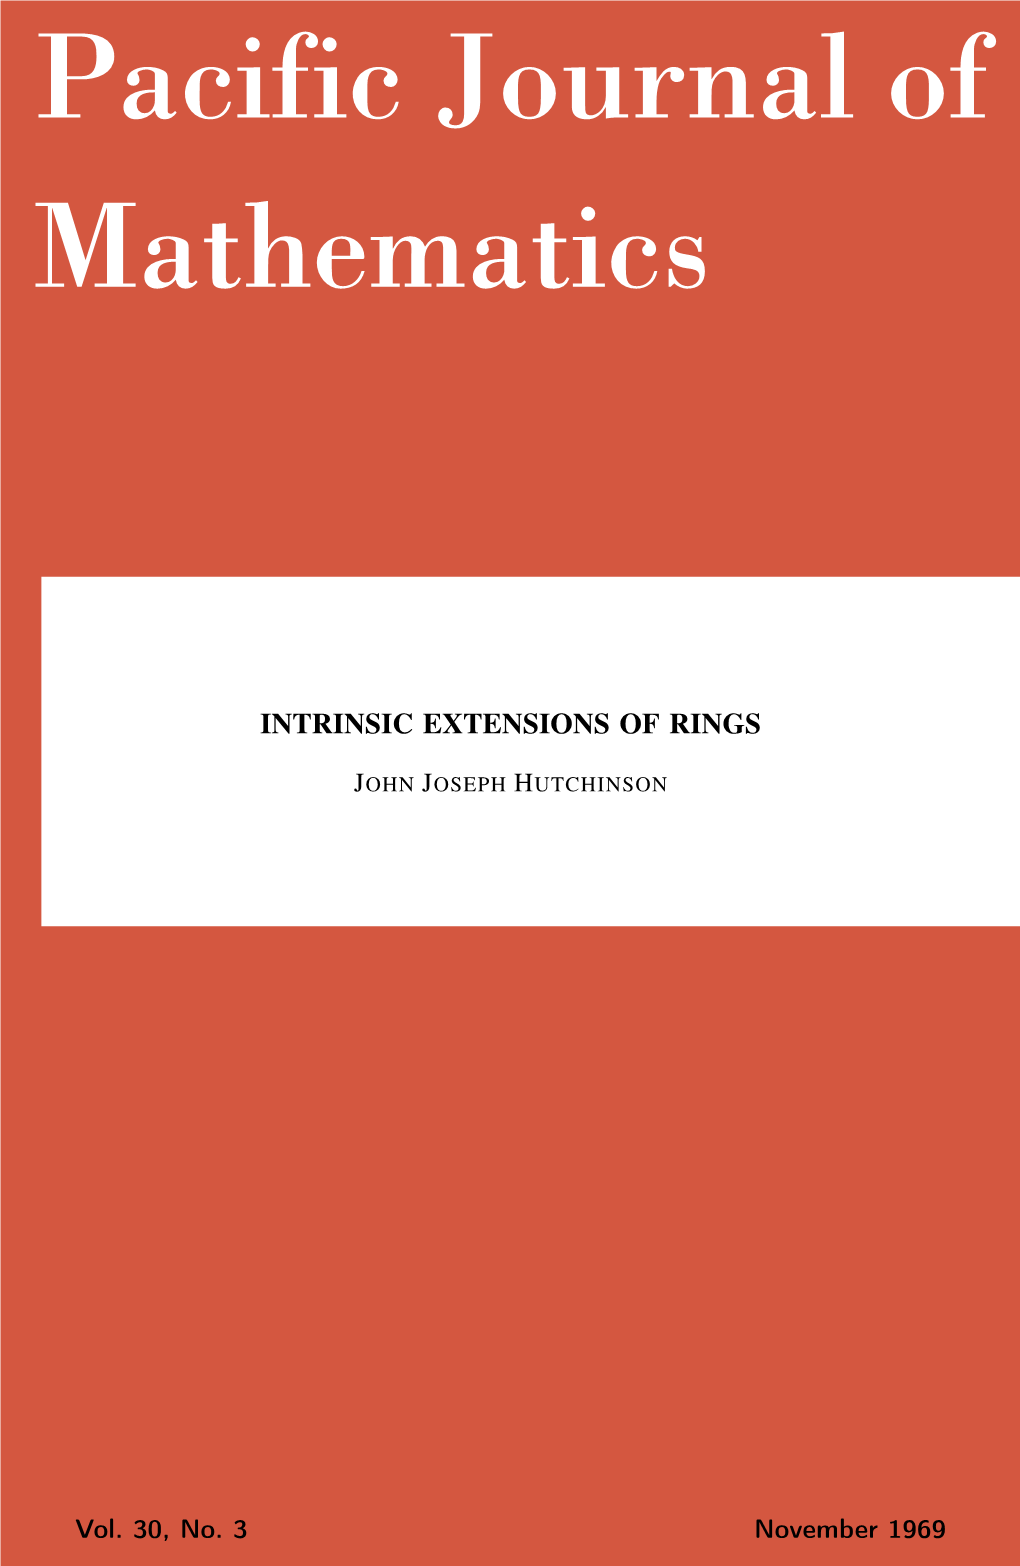 Intrinsic Extensions of Rings